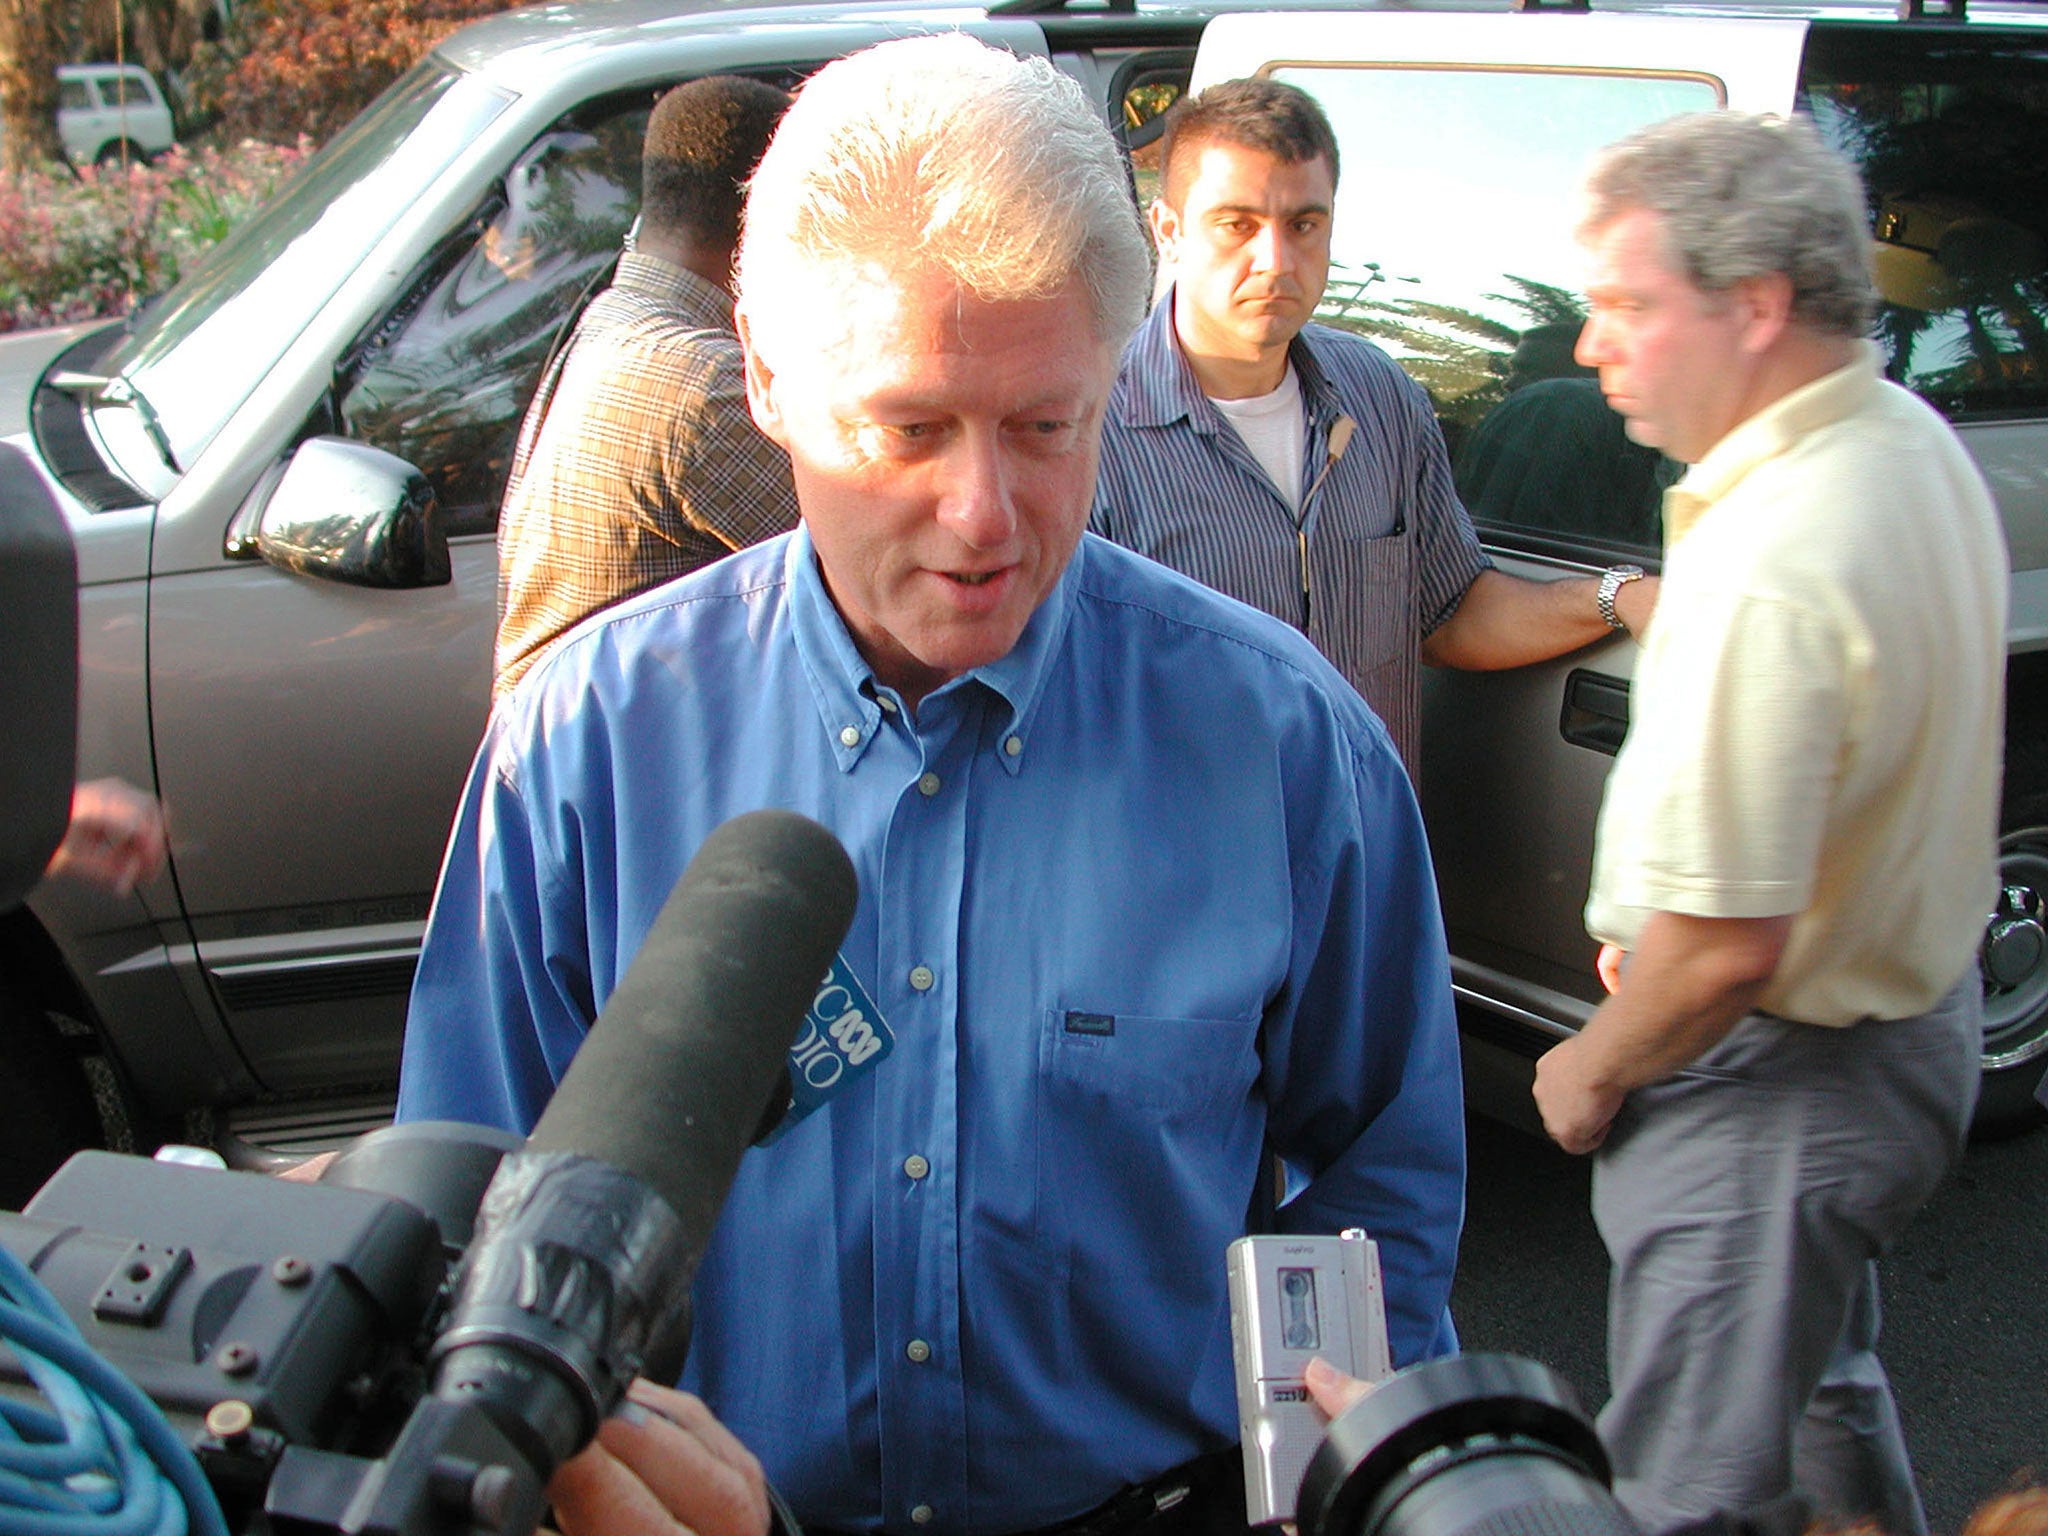 Former U.S. President Bill Clinton speaks with the media
during a press conference September 12, 2001